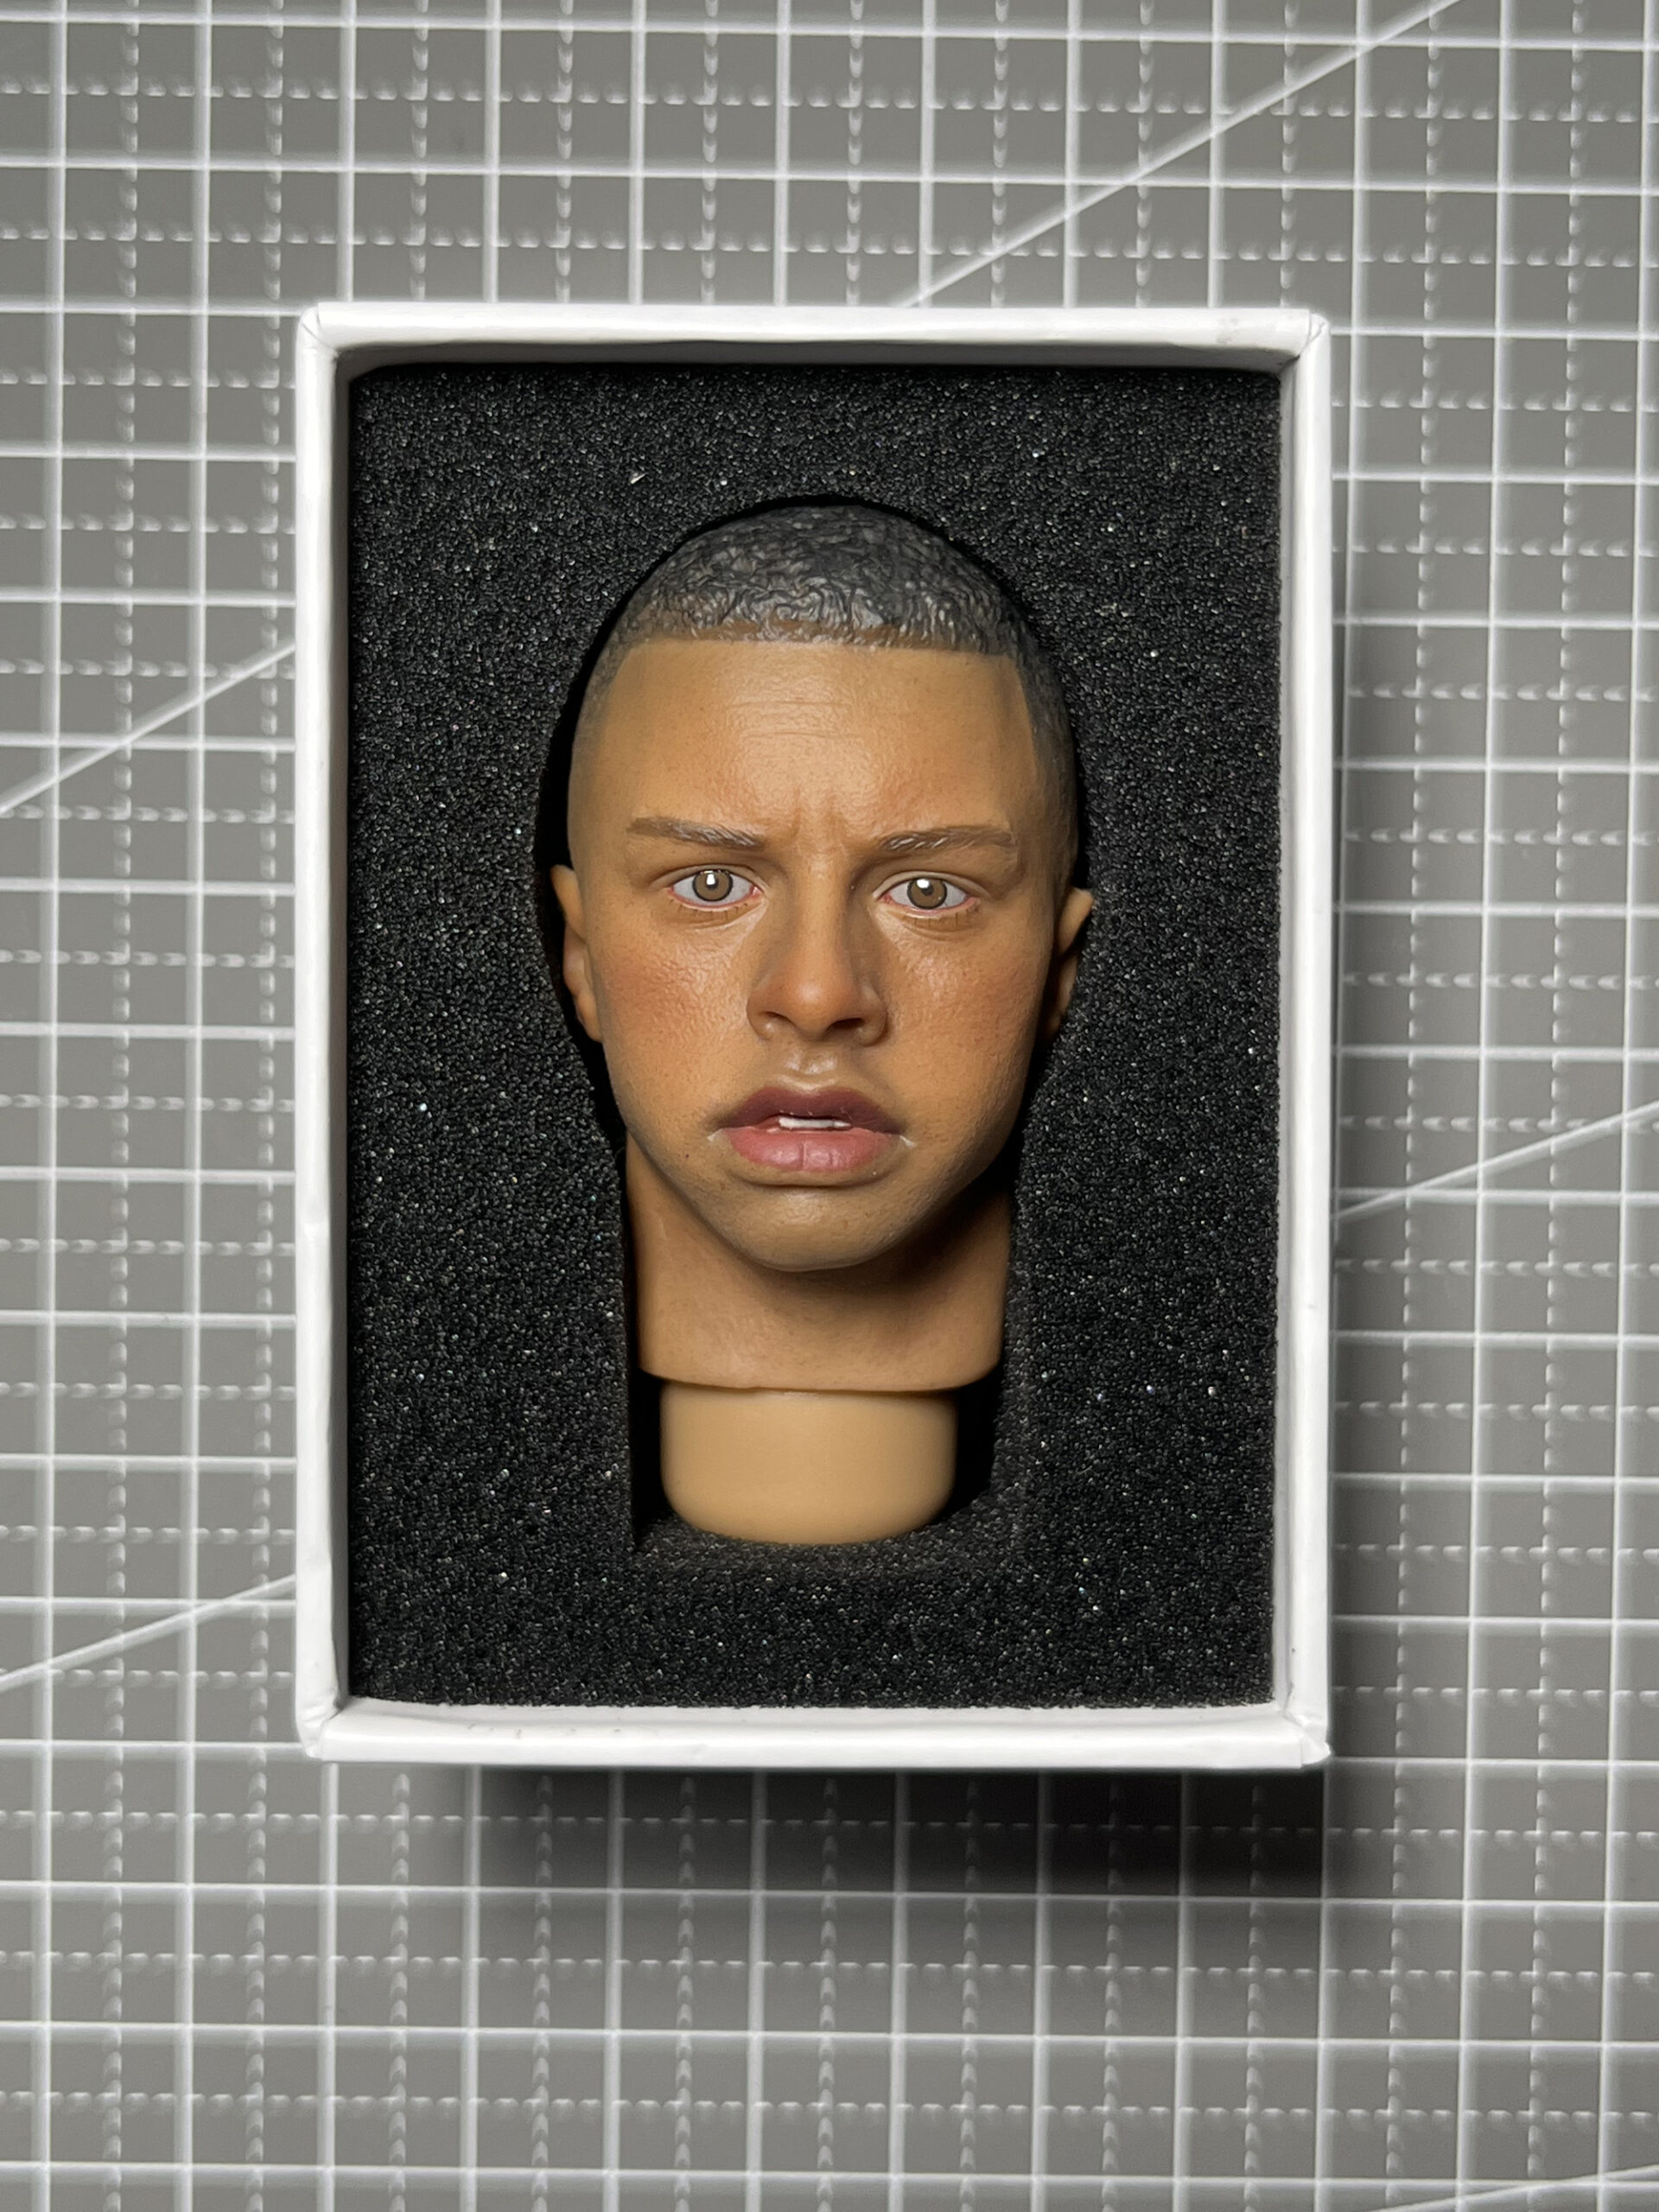 – with Store Male Sculpt 1/6 Online FP-S-002 FacepoolFigure Black Expression Facepoolfigure Head